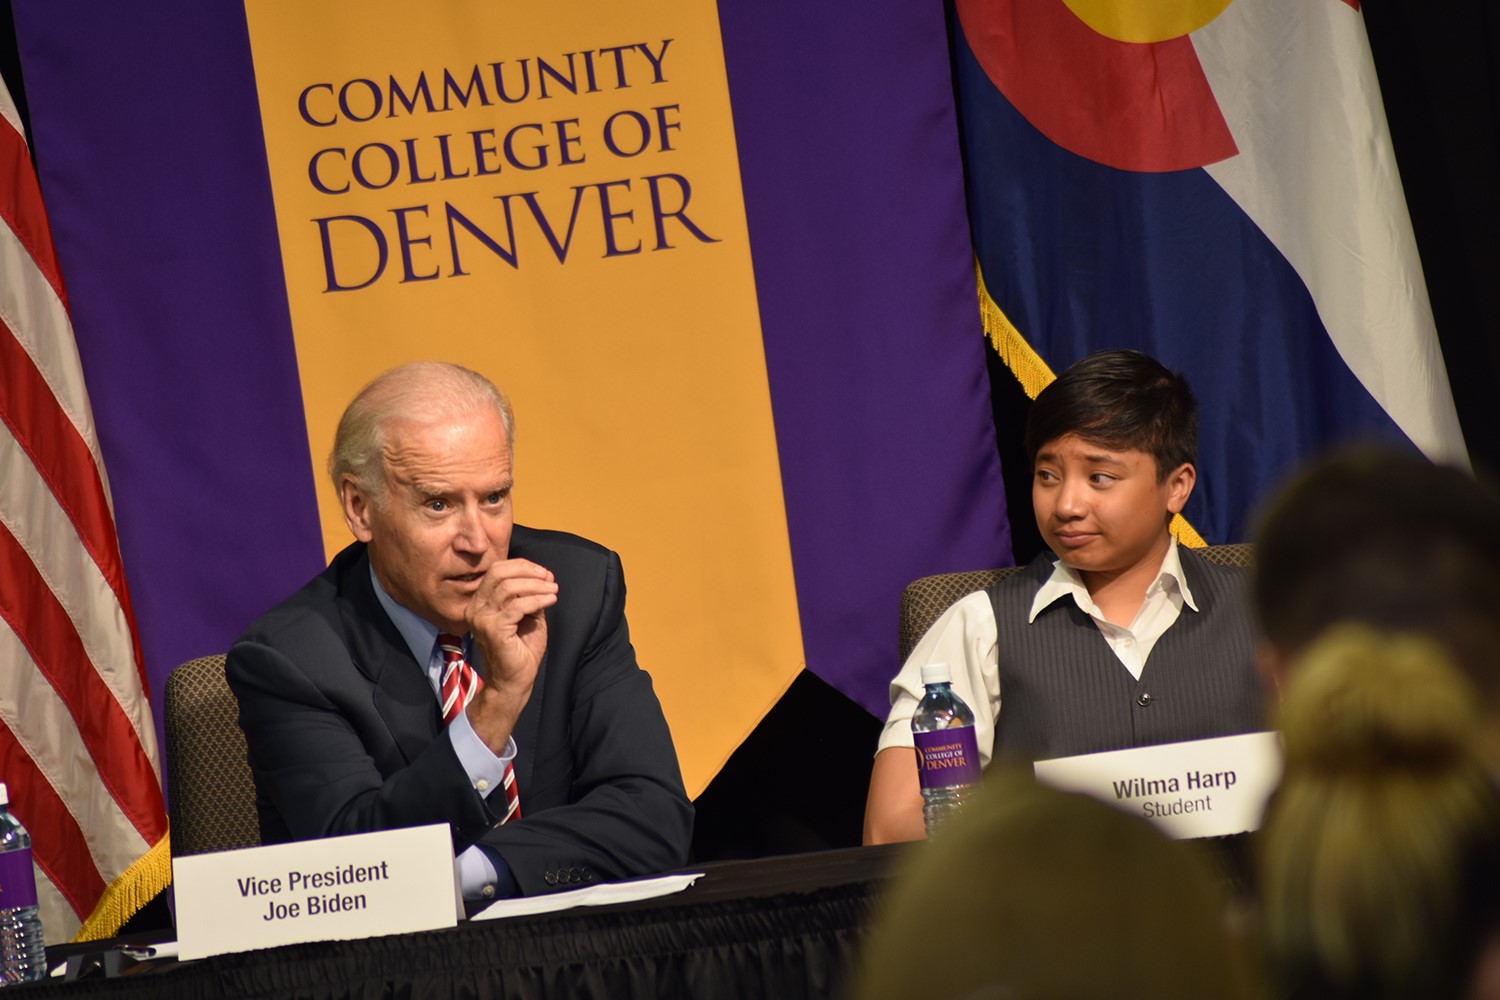 picture of Vice President Joe Biden and CCD student in front of a Community College of Denver sign.